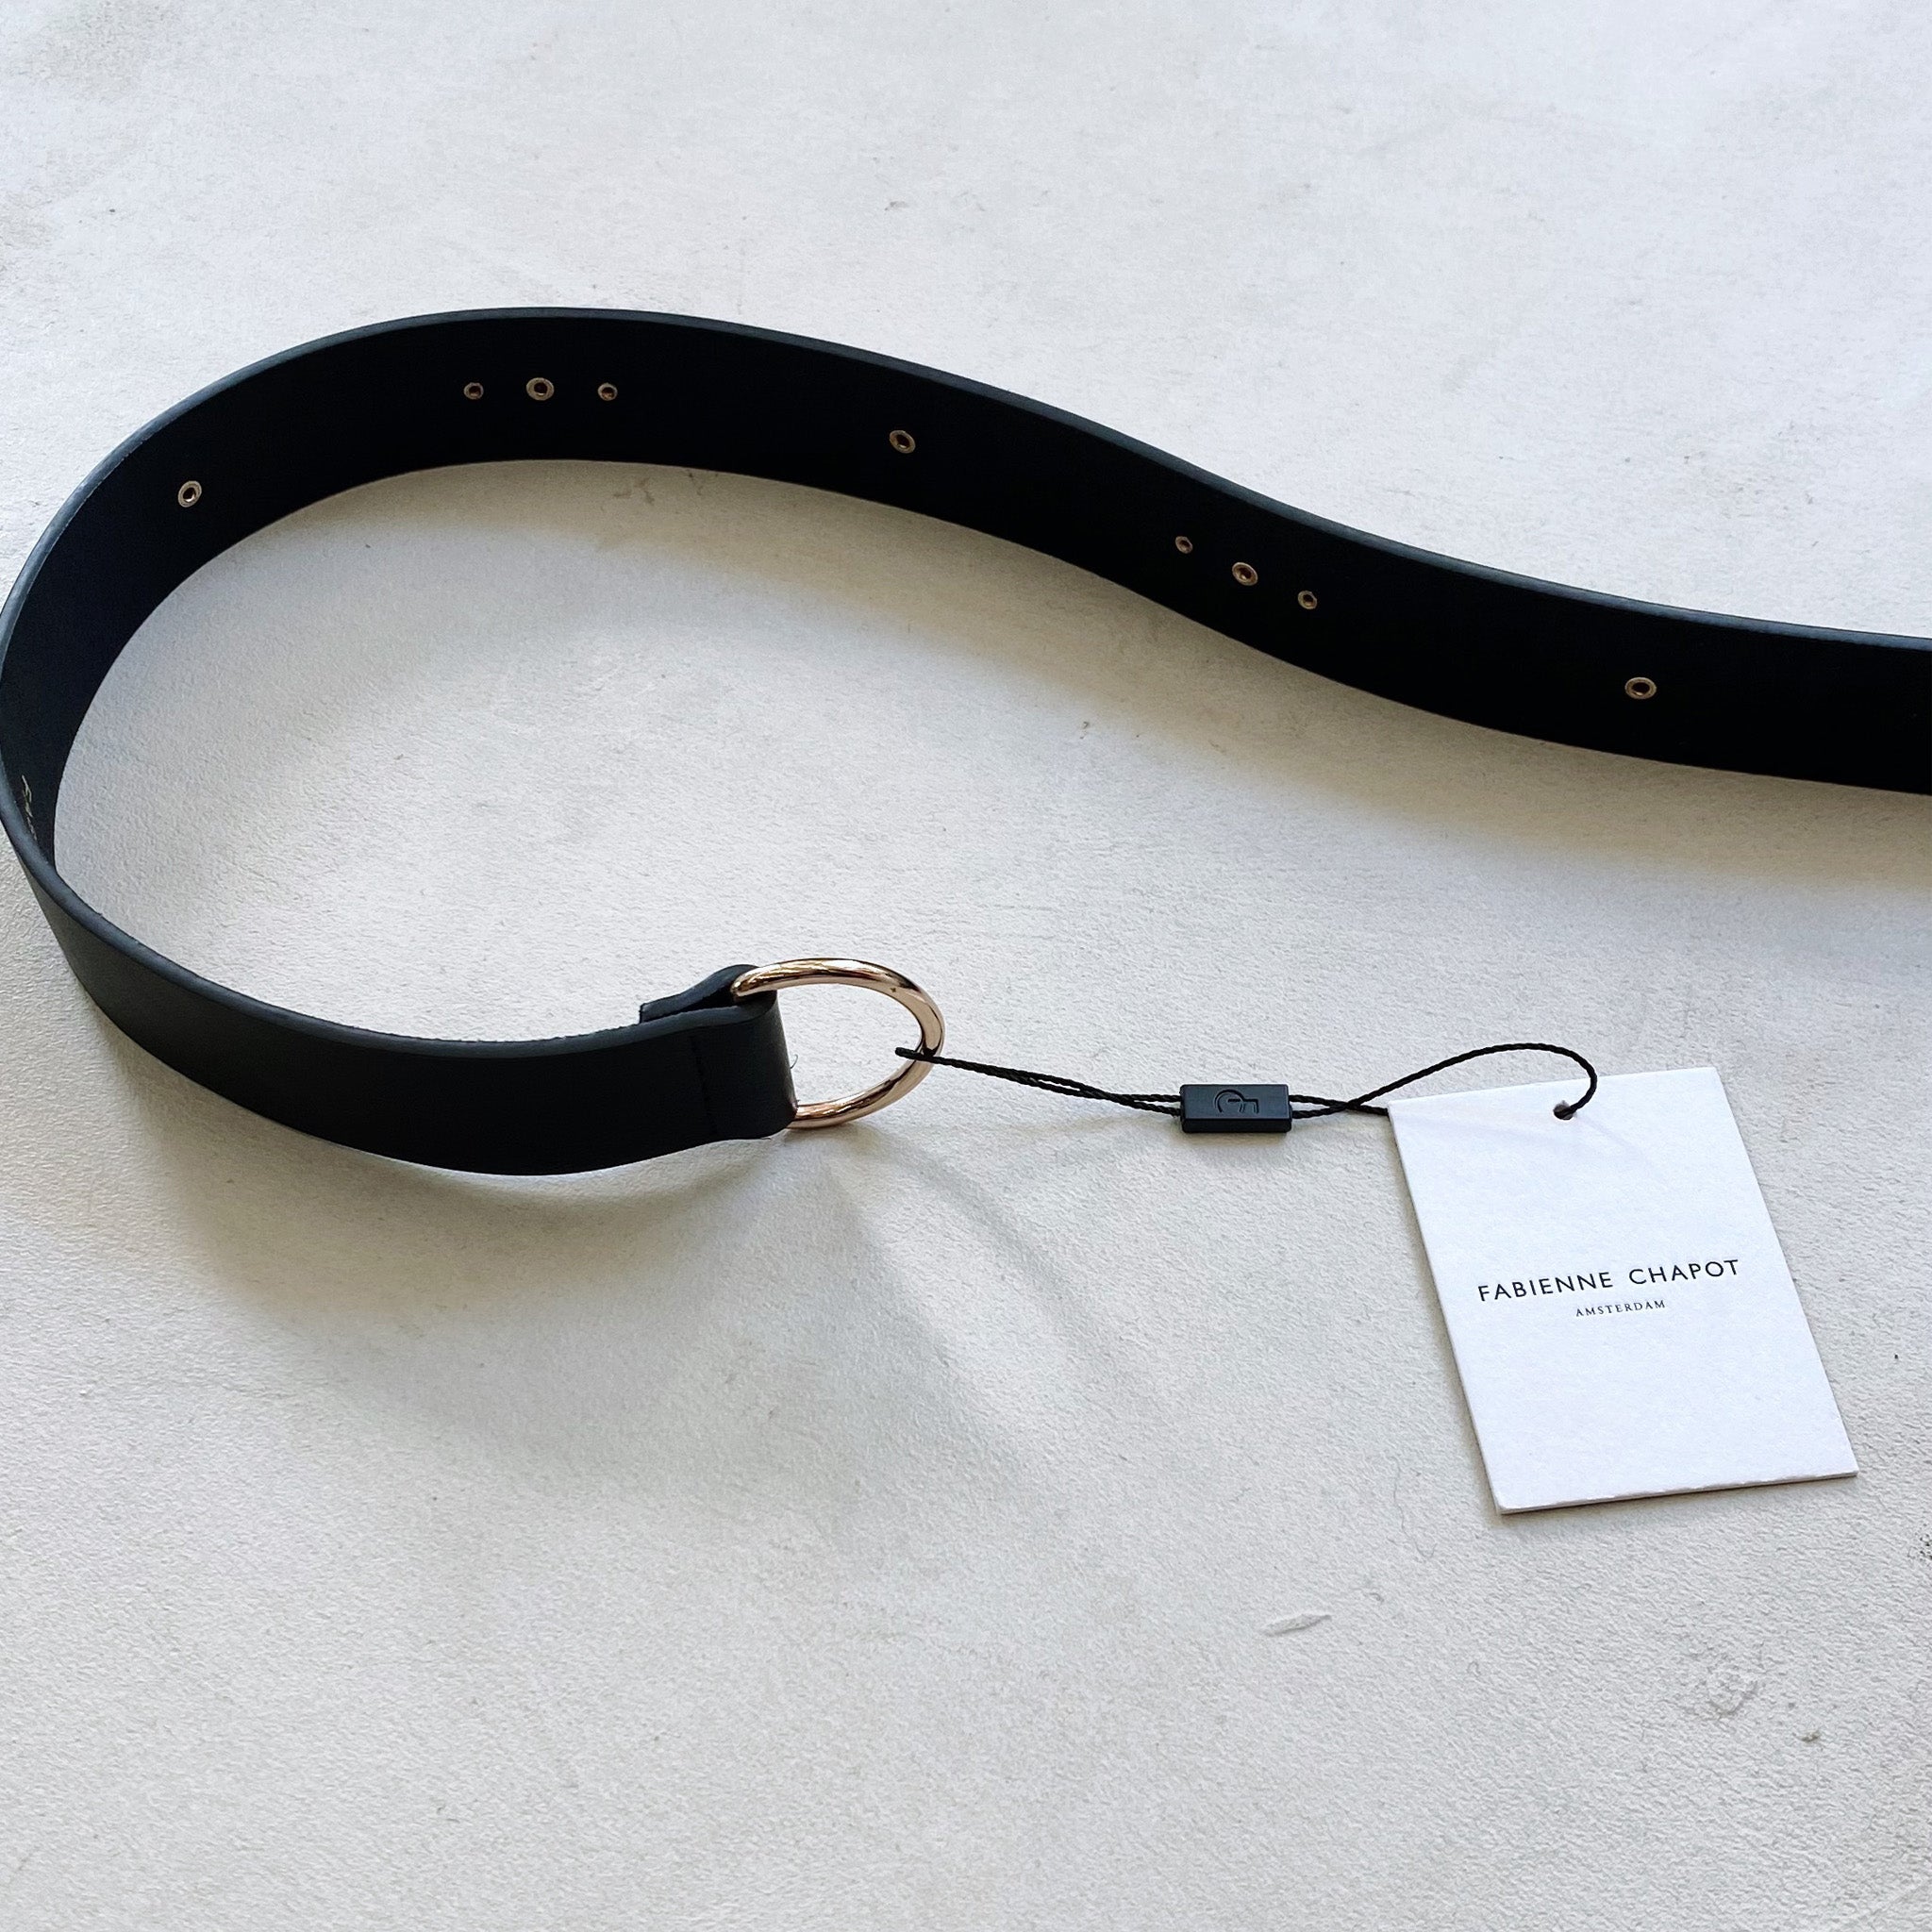 A Fabienne Chapot black leather belt with a tag on it, featuring gold studs.